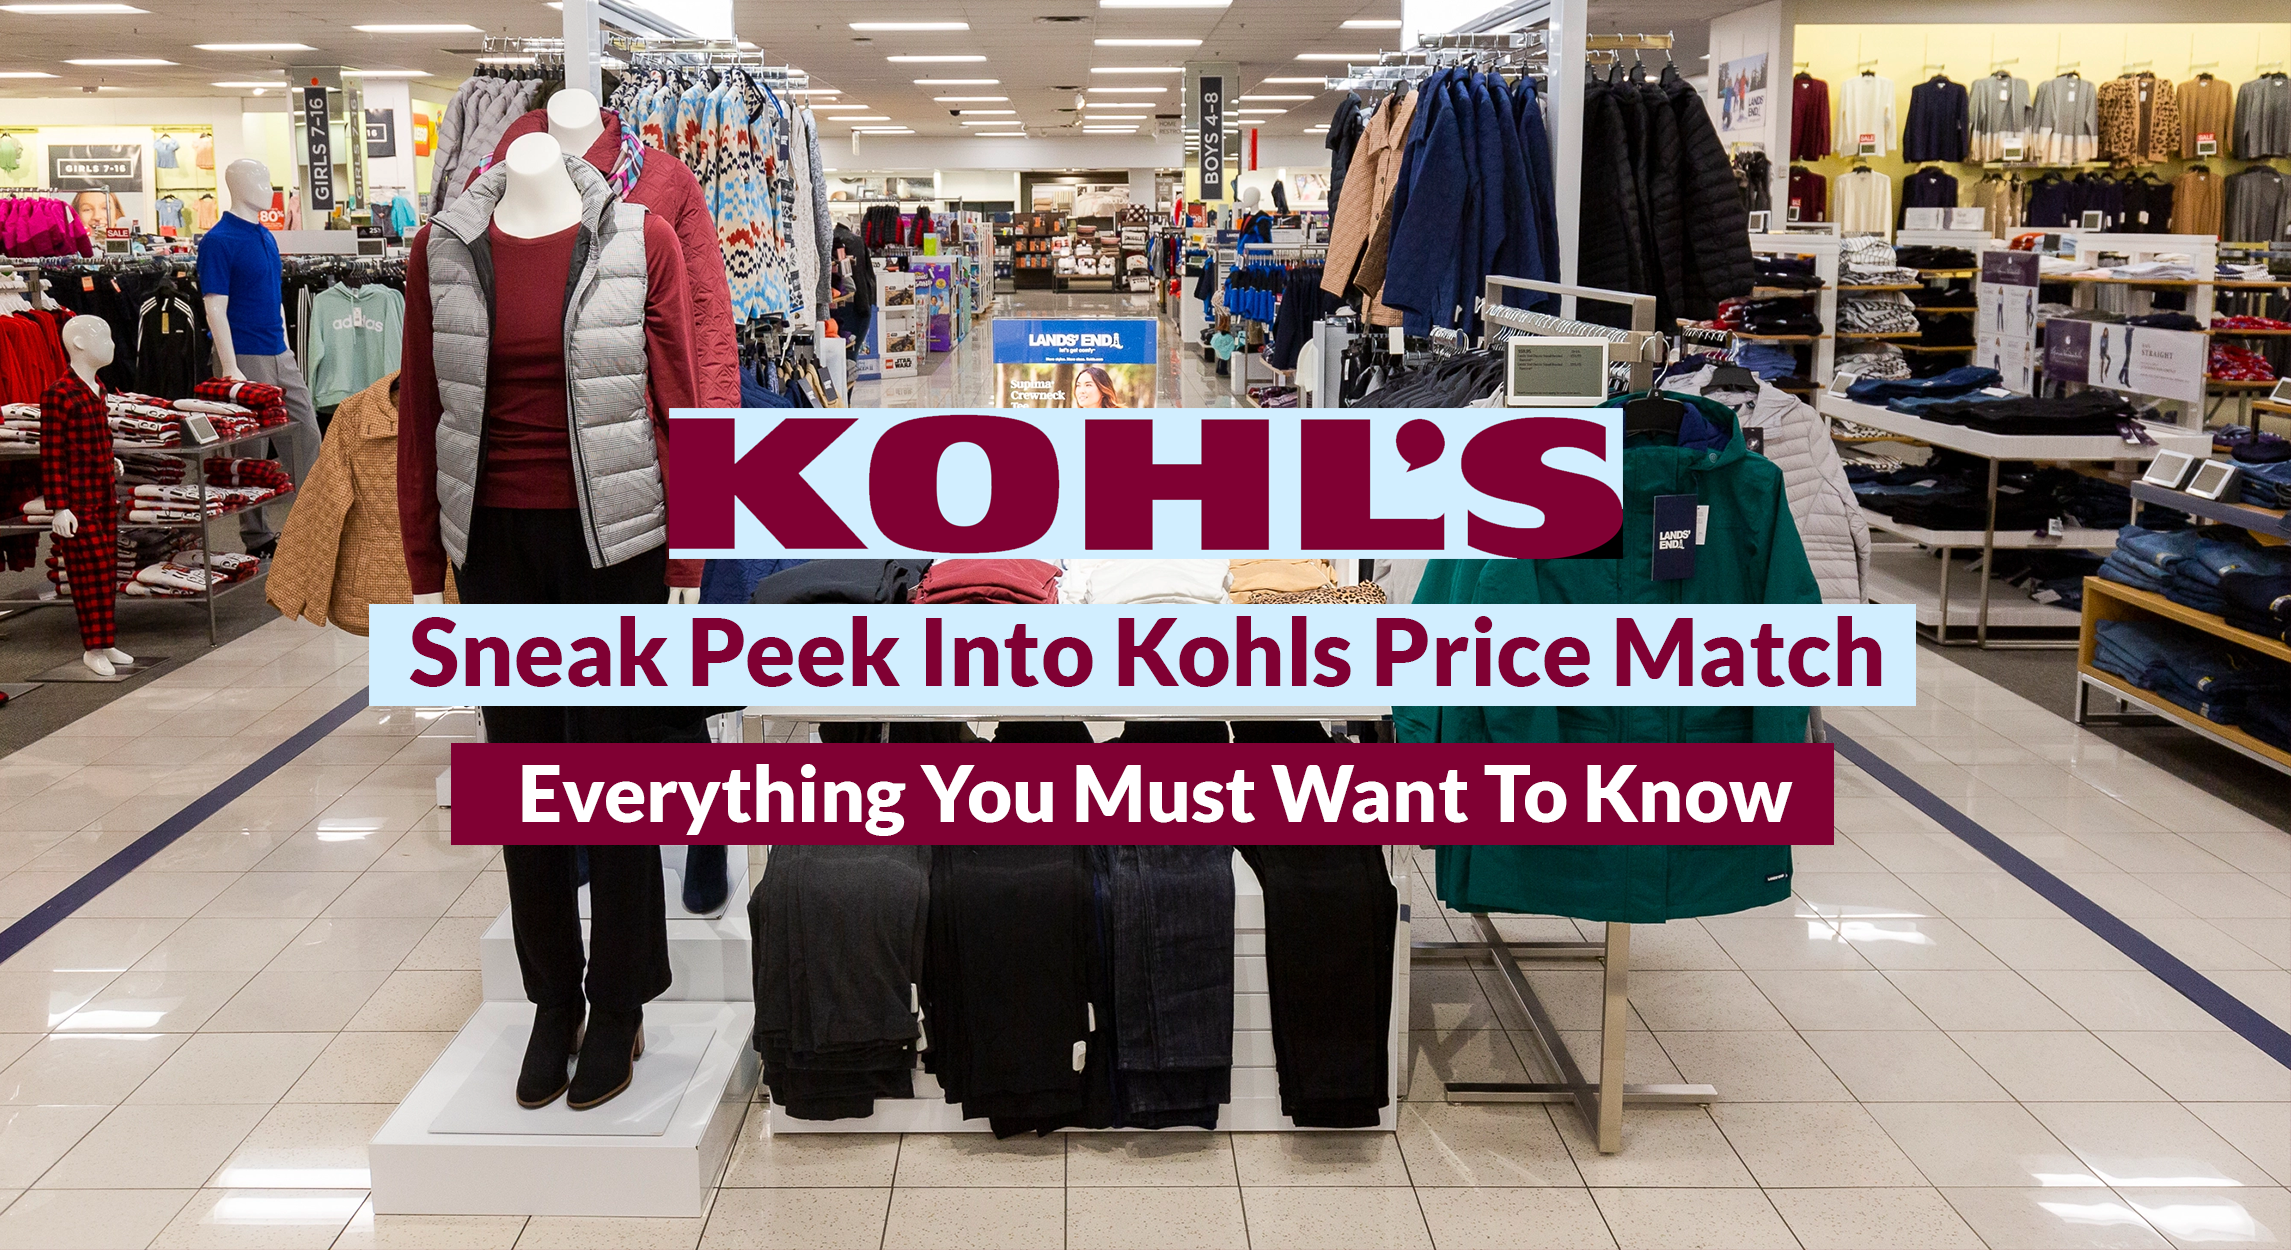 Sneak Peek Into Kohls Price Match- Everything You Must Want To Know